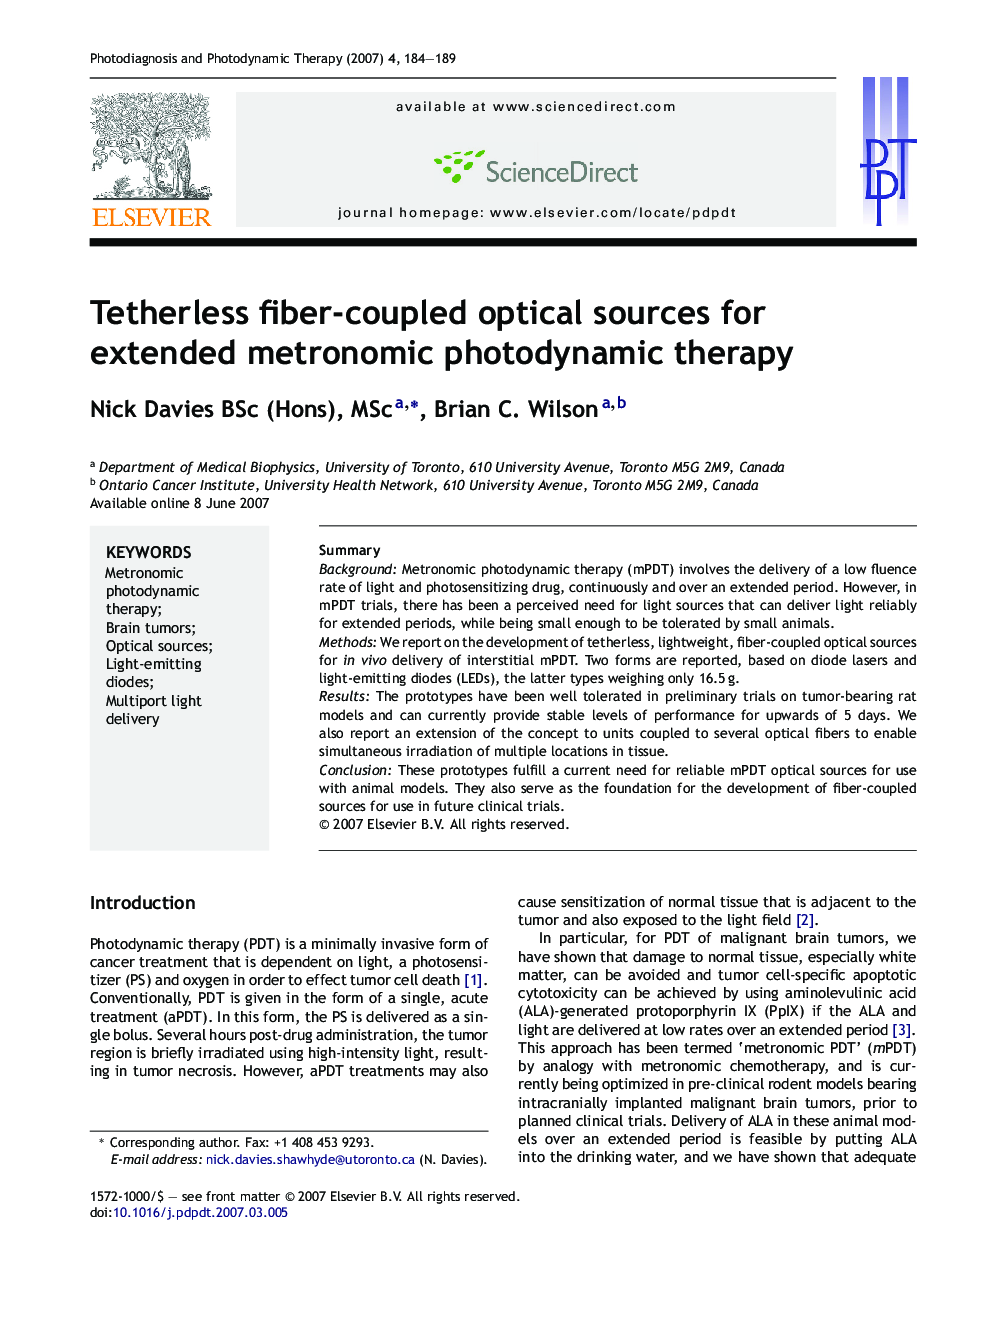 Tetherless fiber-coupled optical sources for extended metronomic photodynamic therapy